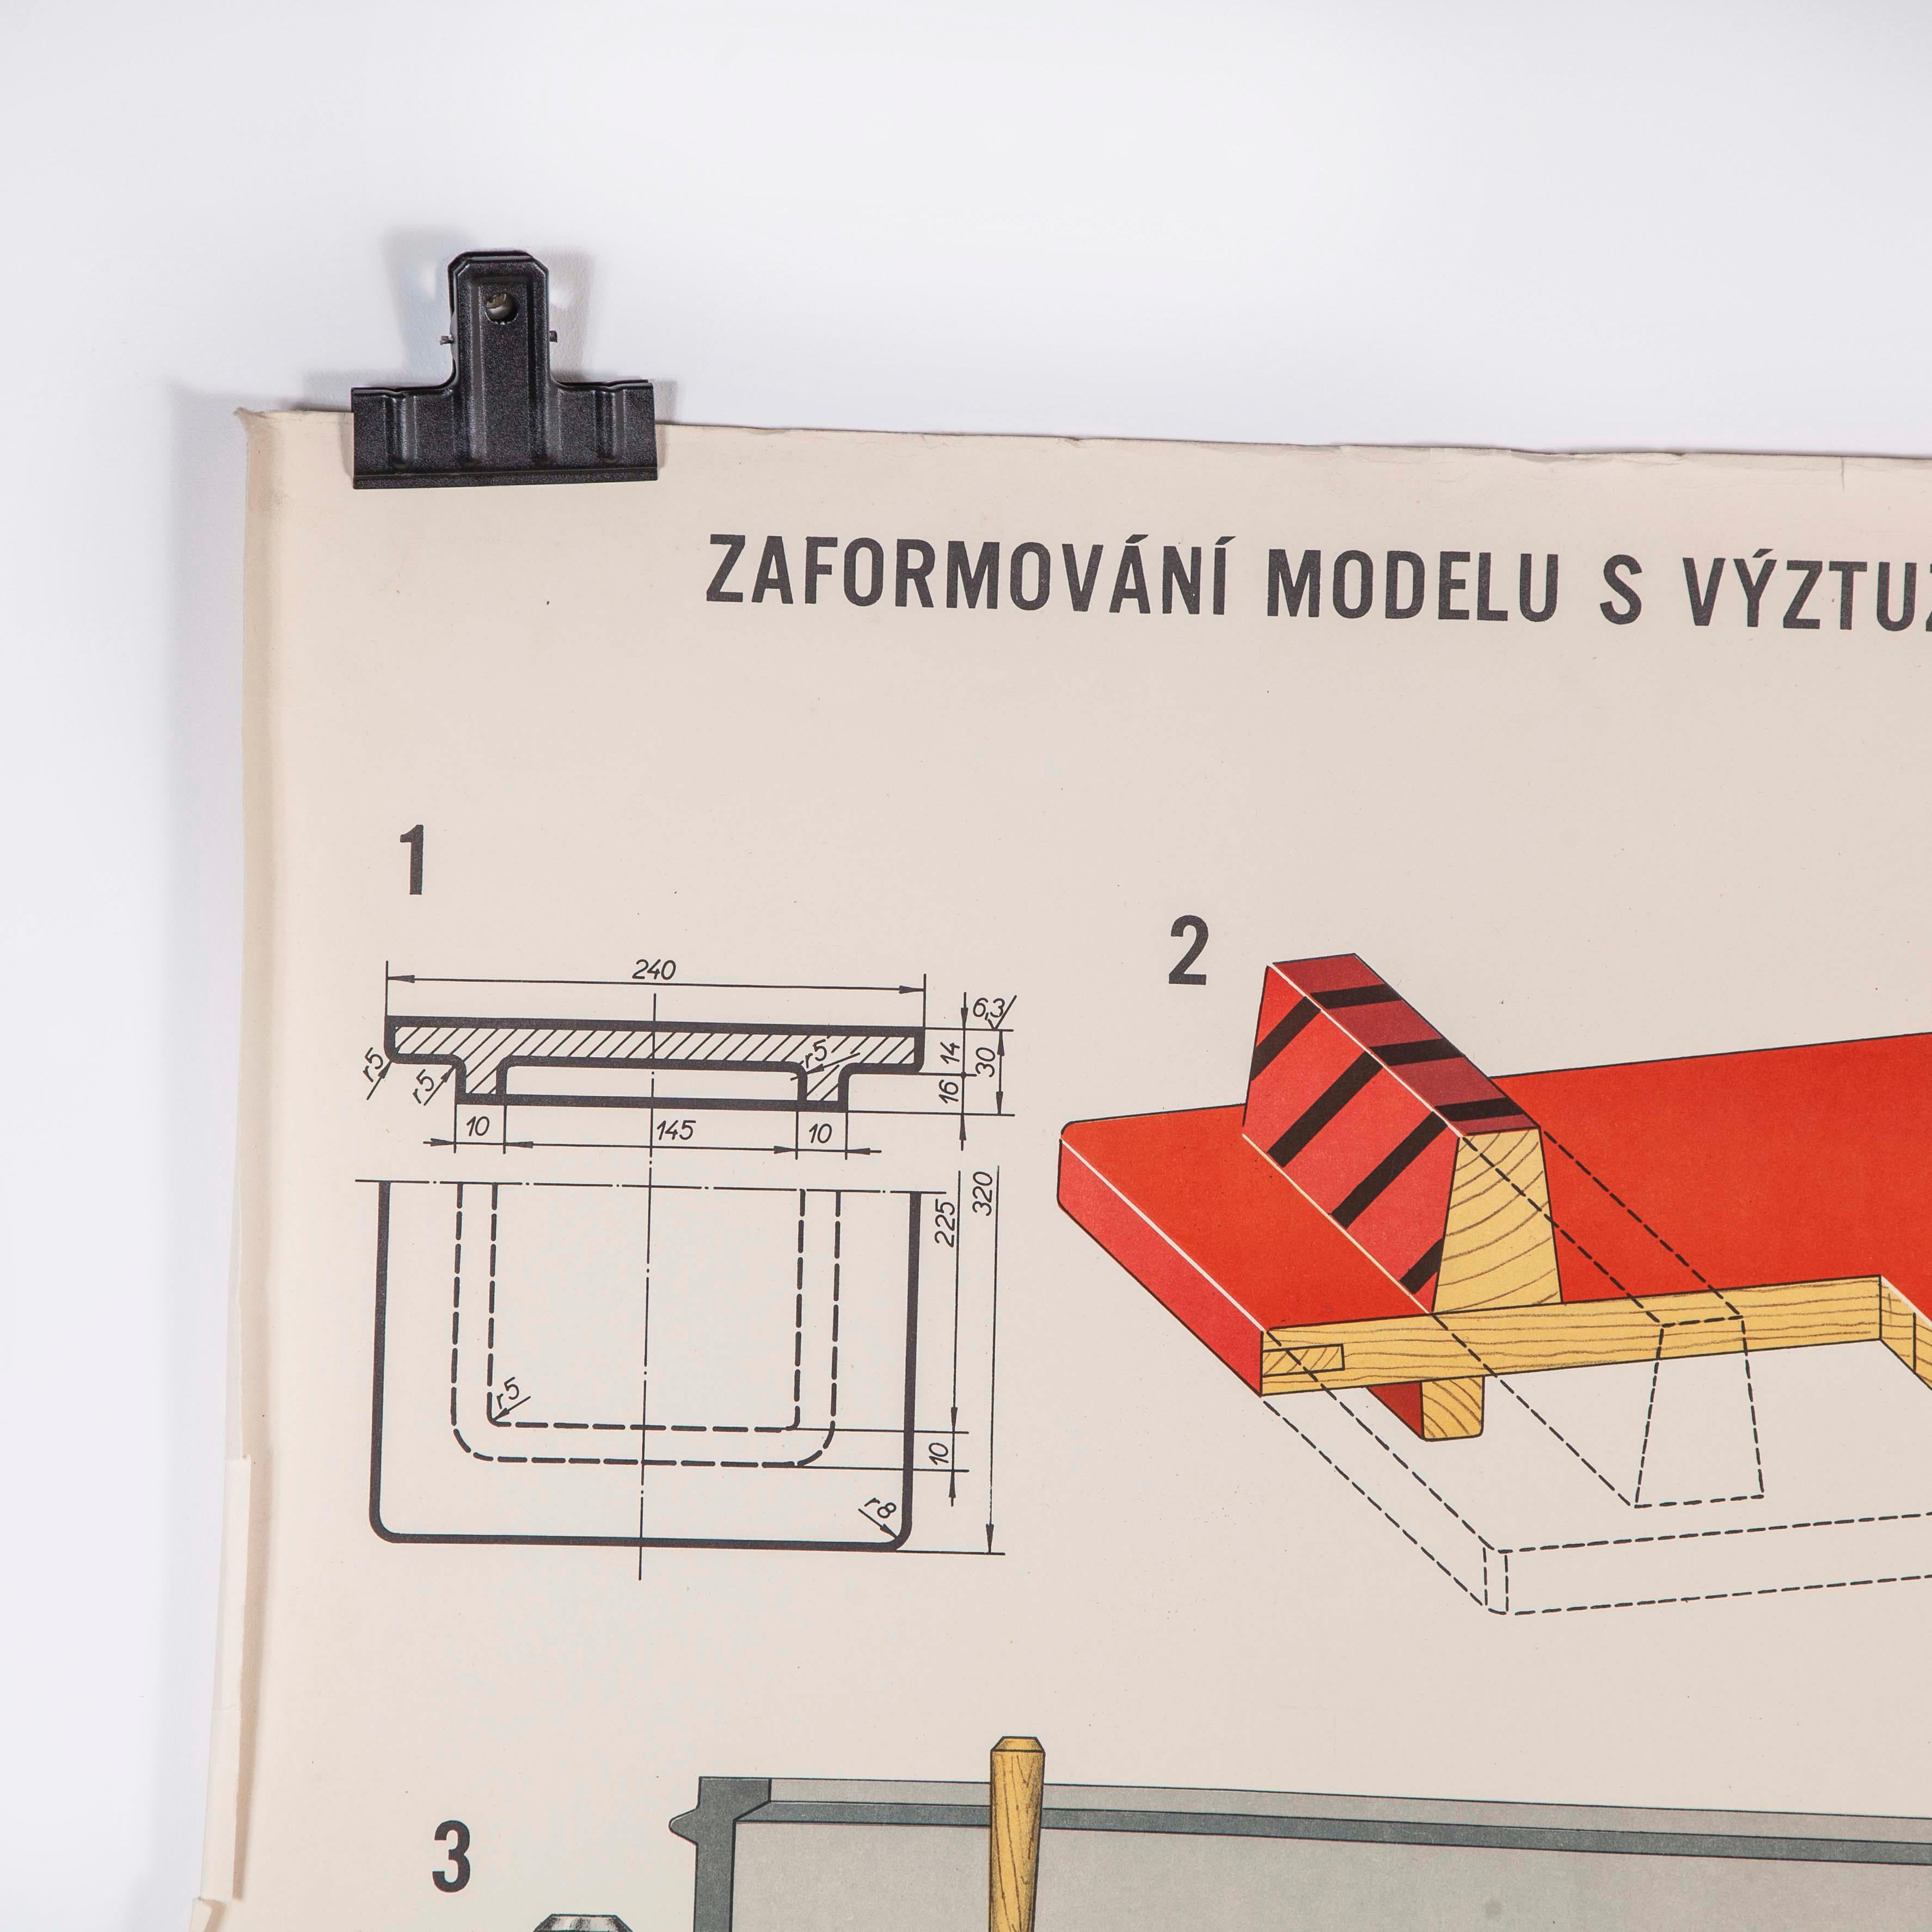 Late 20th Century Czech Technical Industrial Drawing, Foundry Mould Engineering Poster, 4